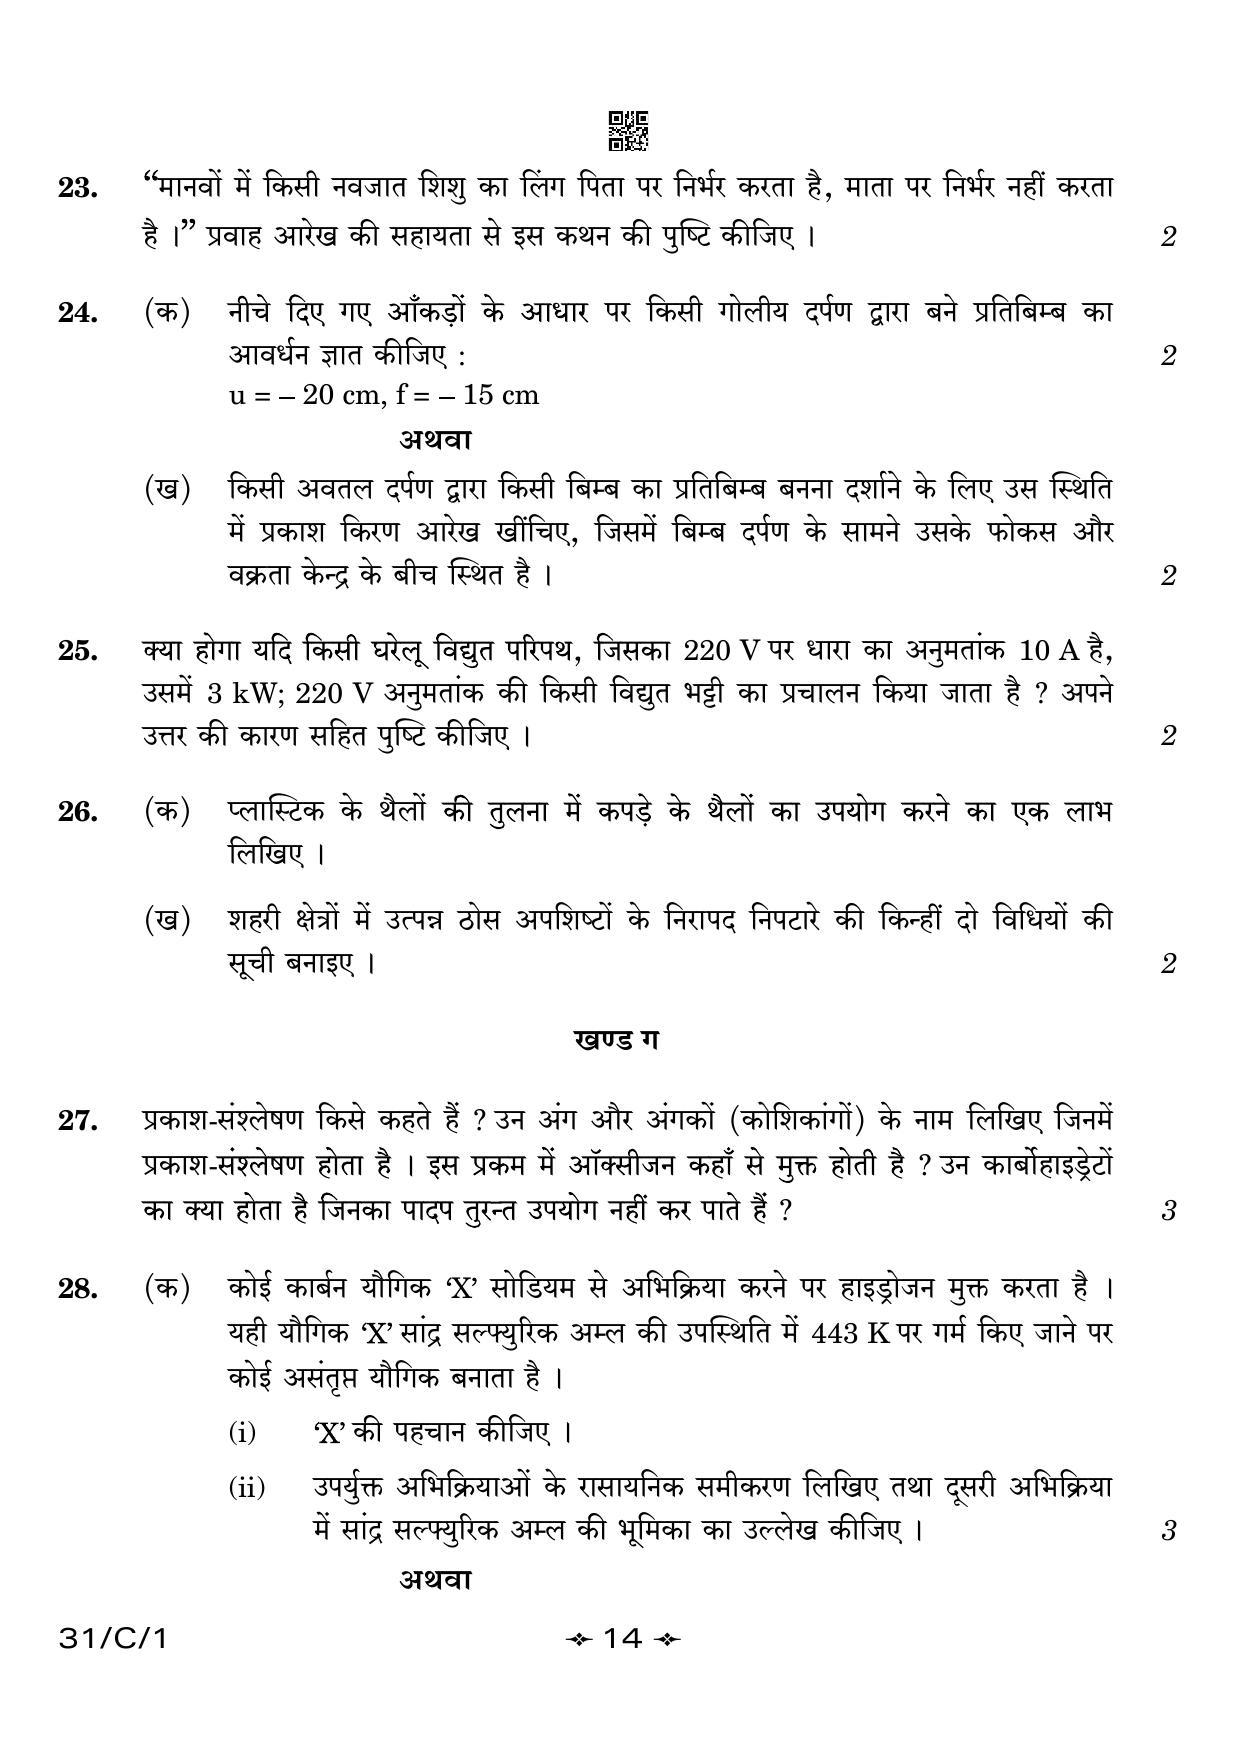 CBSE Class 10 31-1 Science 2023 (Compartment) Question Paper - Page 14